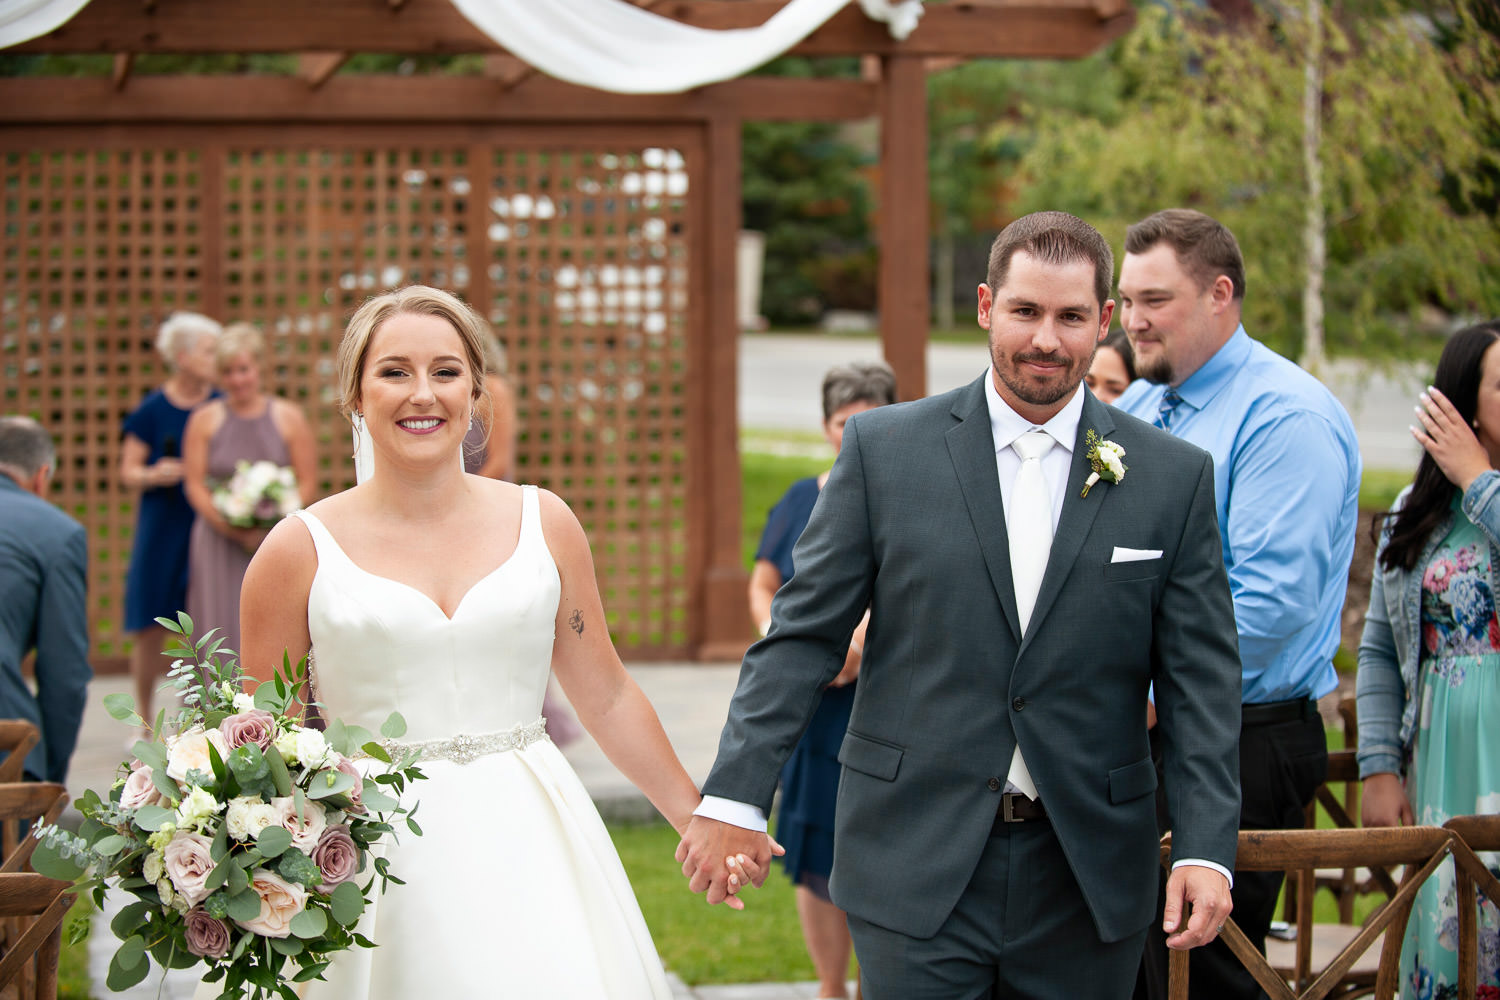 Happy bride and groom after their Creekside Villa wedding captured by Tara Whittaker Photography